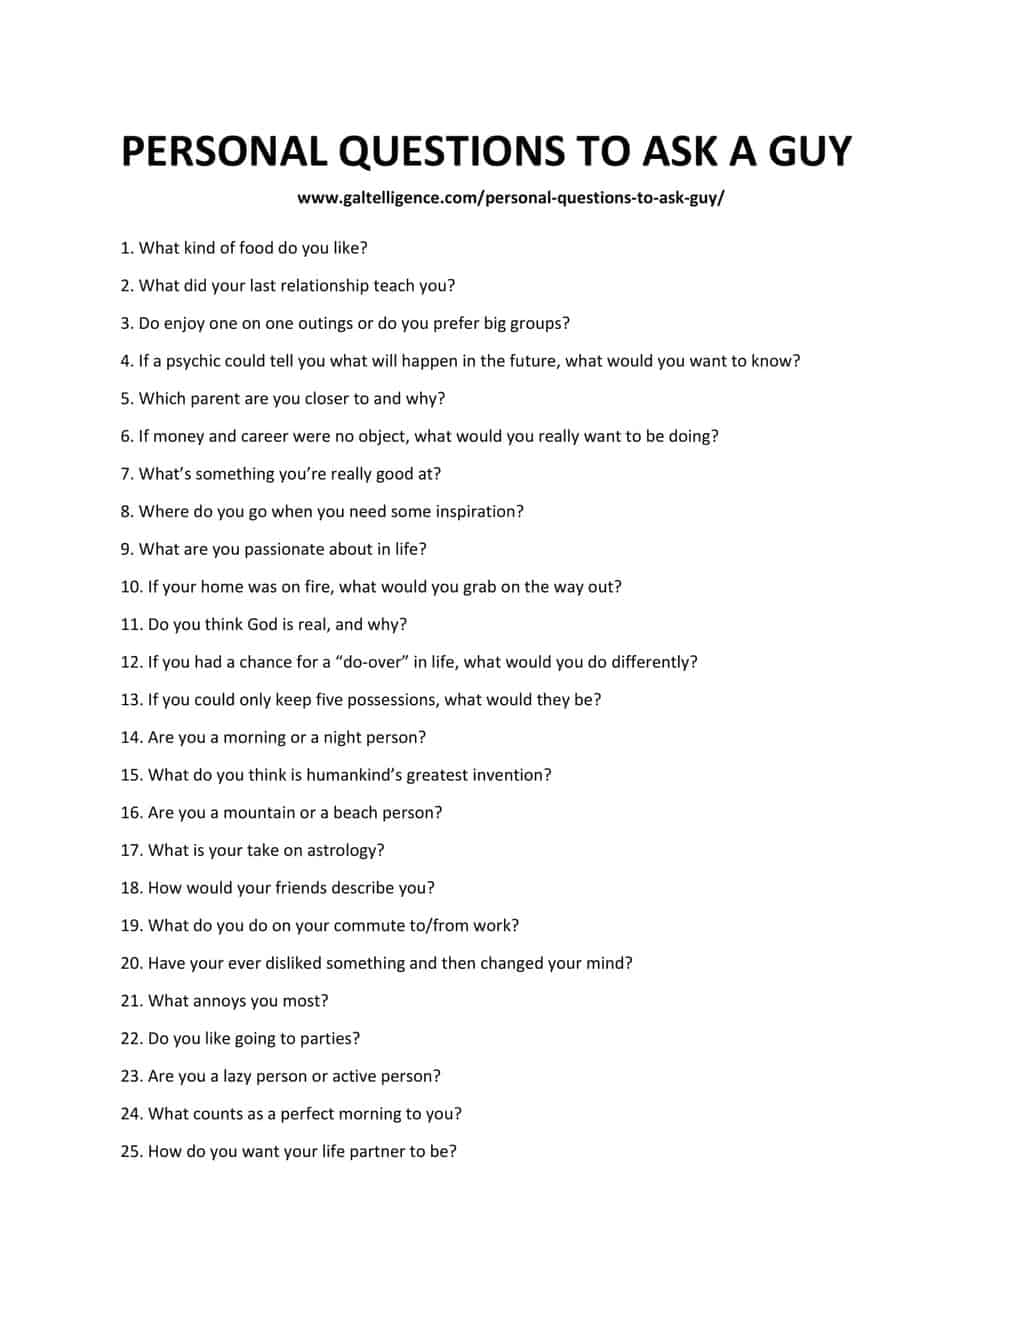 PERSONAL_QUESTIONS_TO_ASK_A_GUY_(1)-1[1]